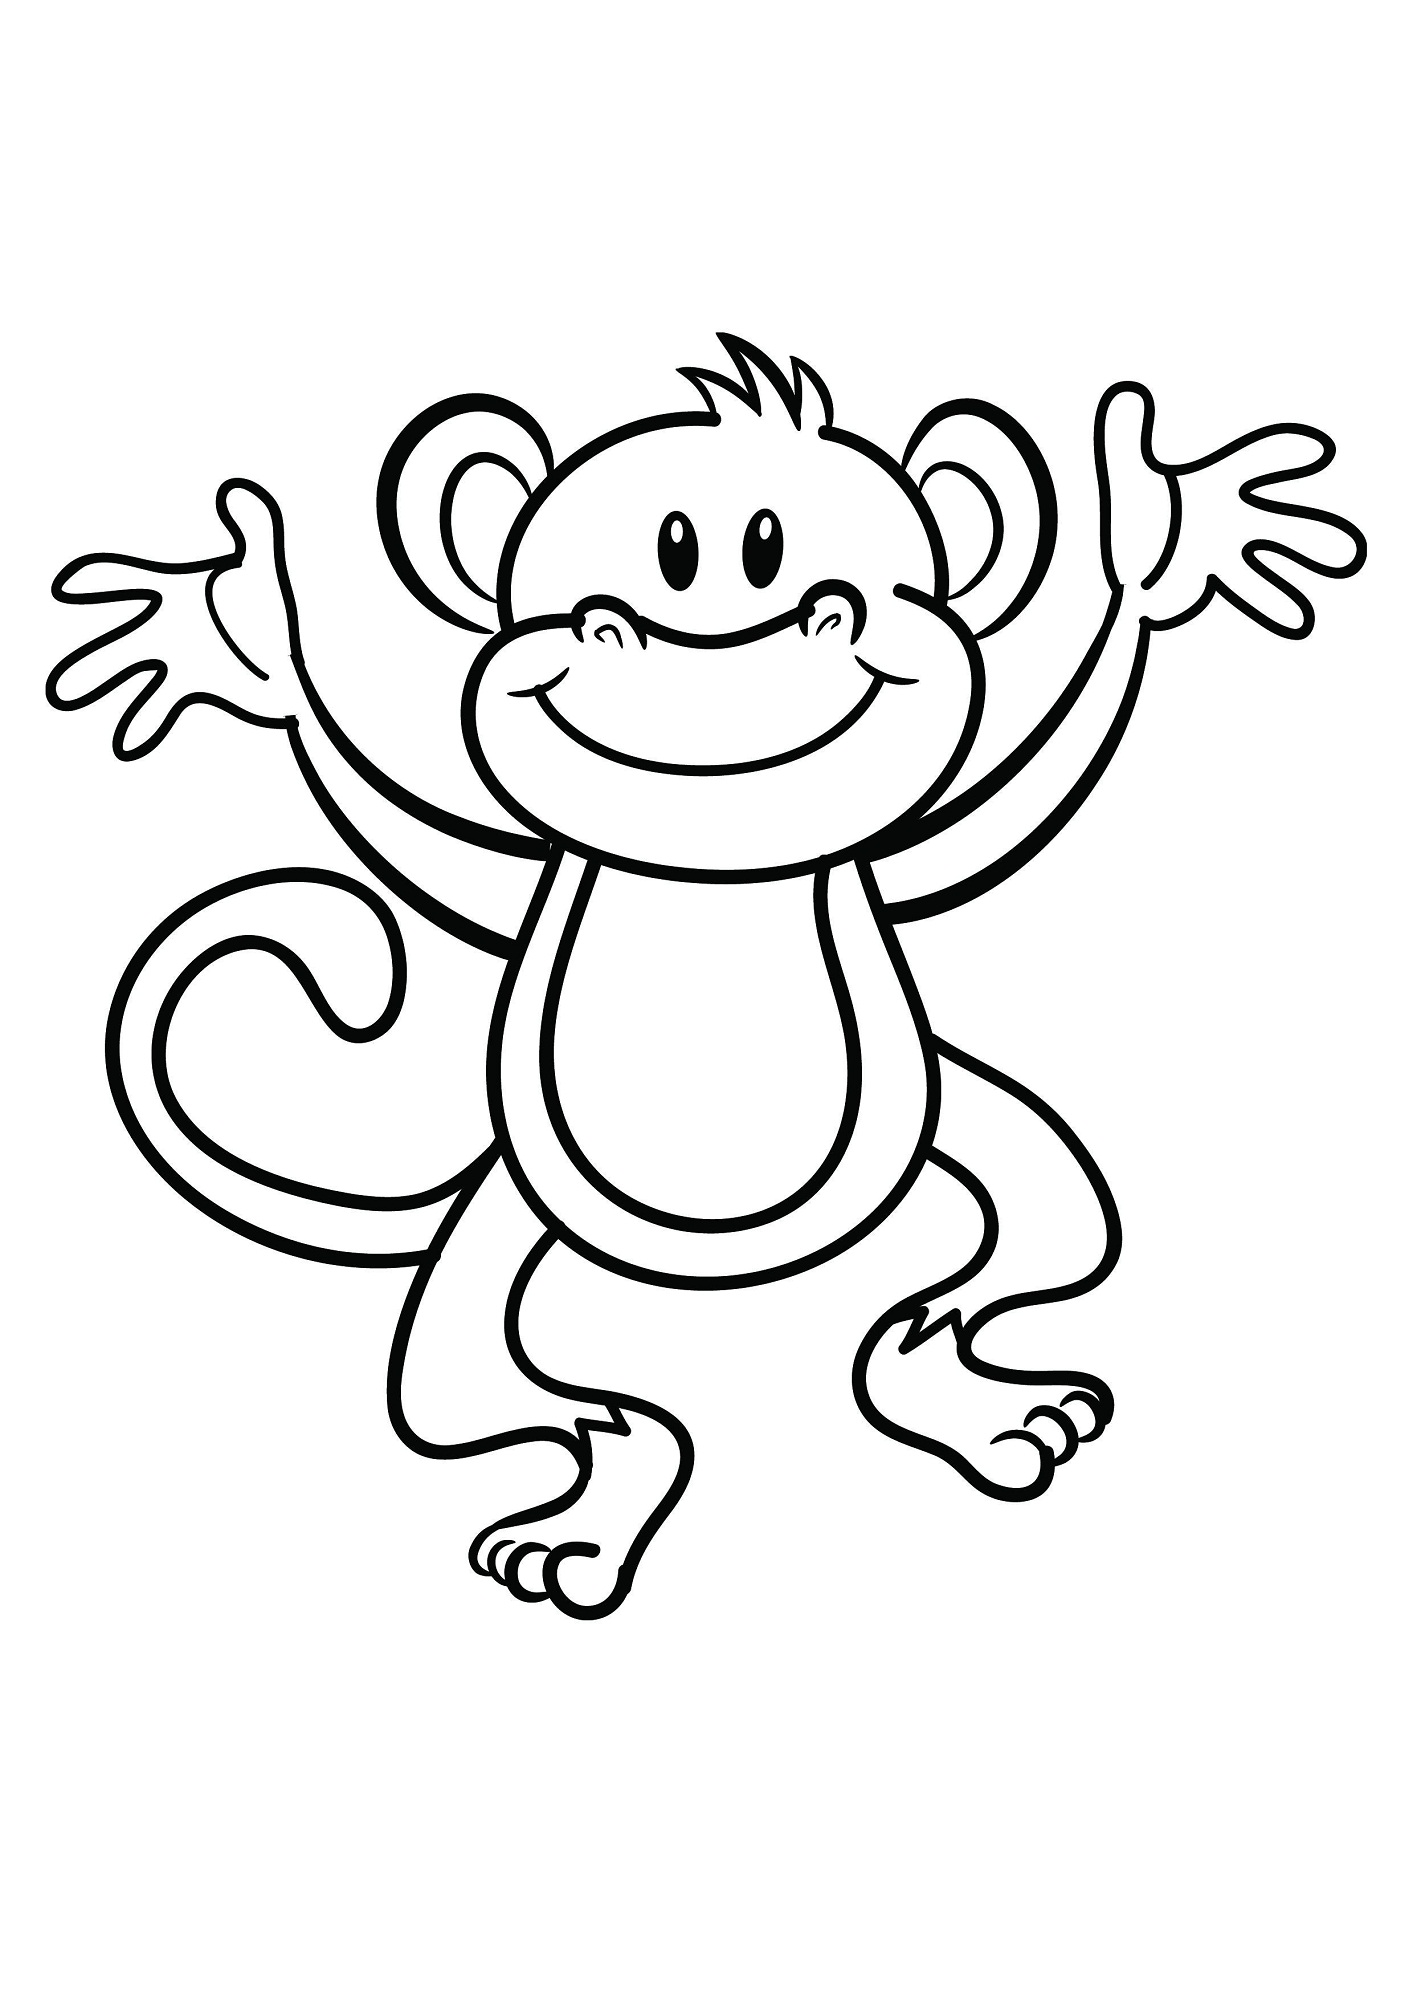 printable-monkey-pictures-printable-world-holiday